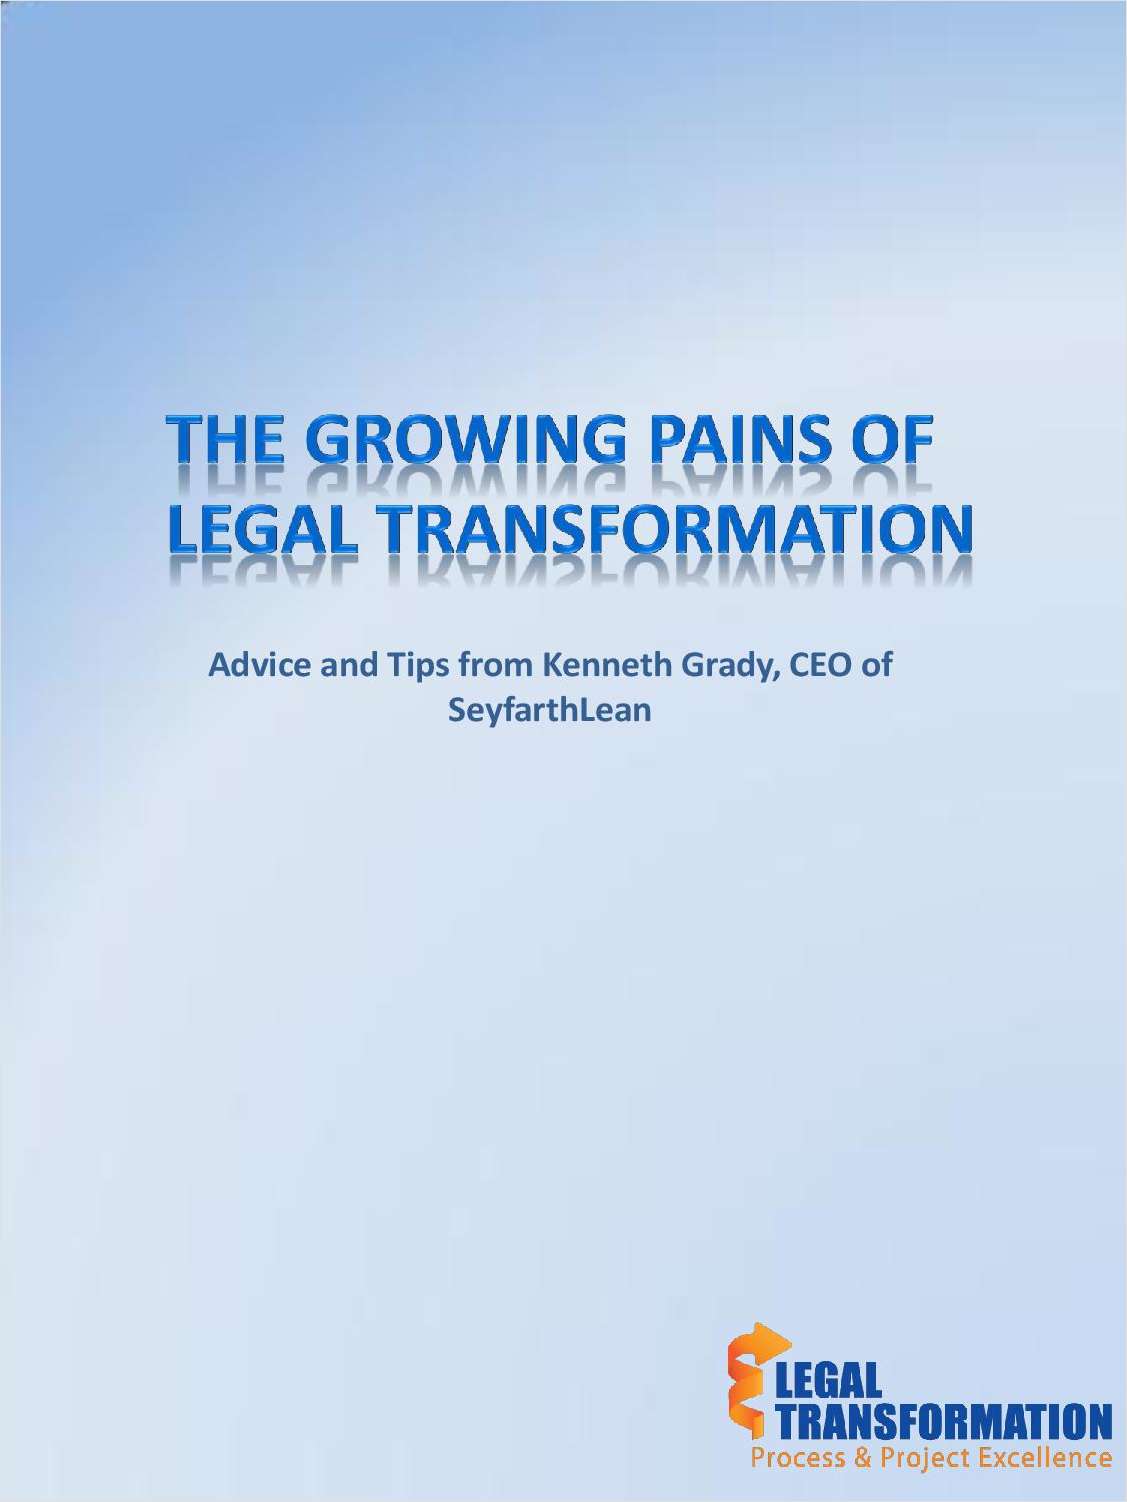 The Growing Pains of Legal Transformation